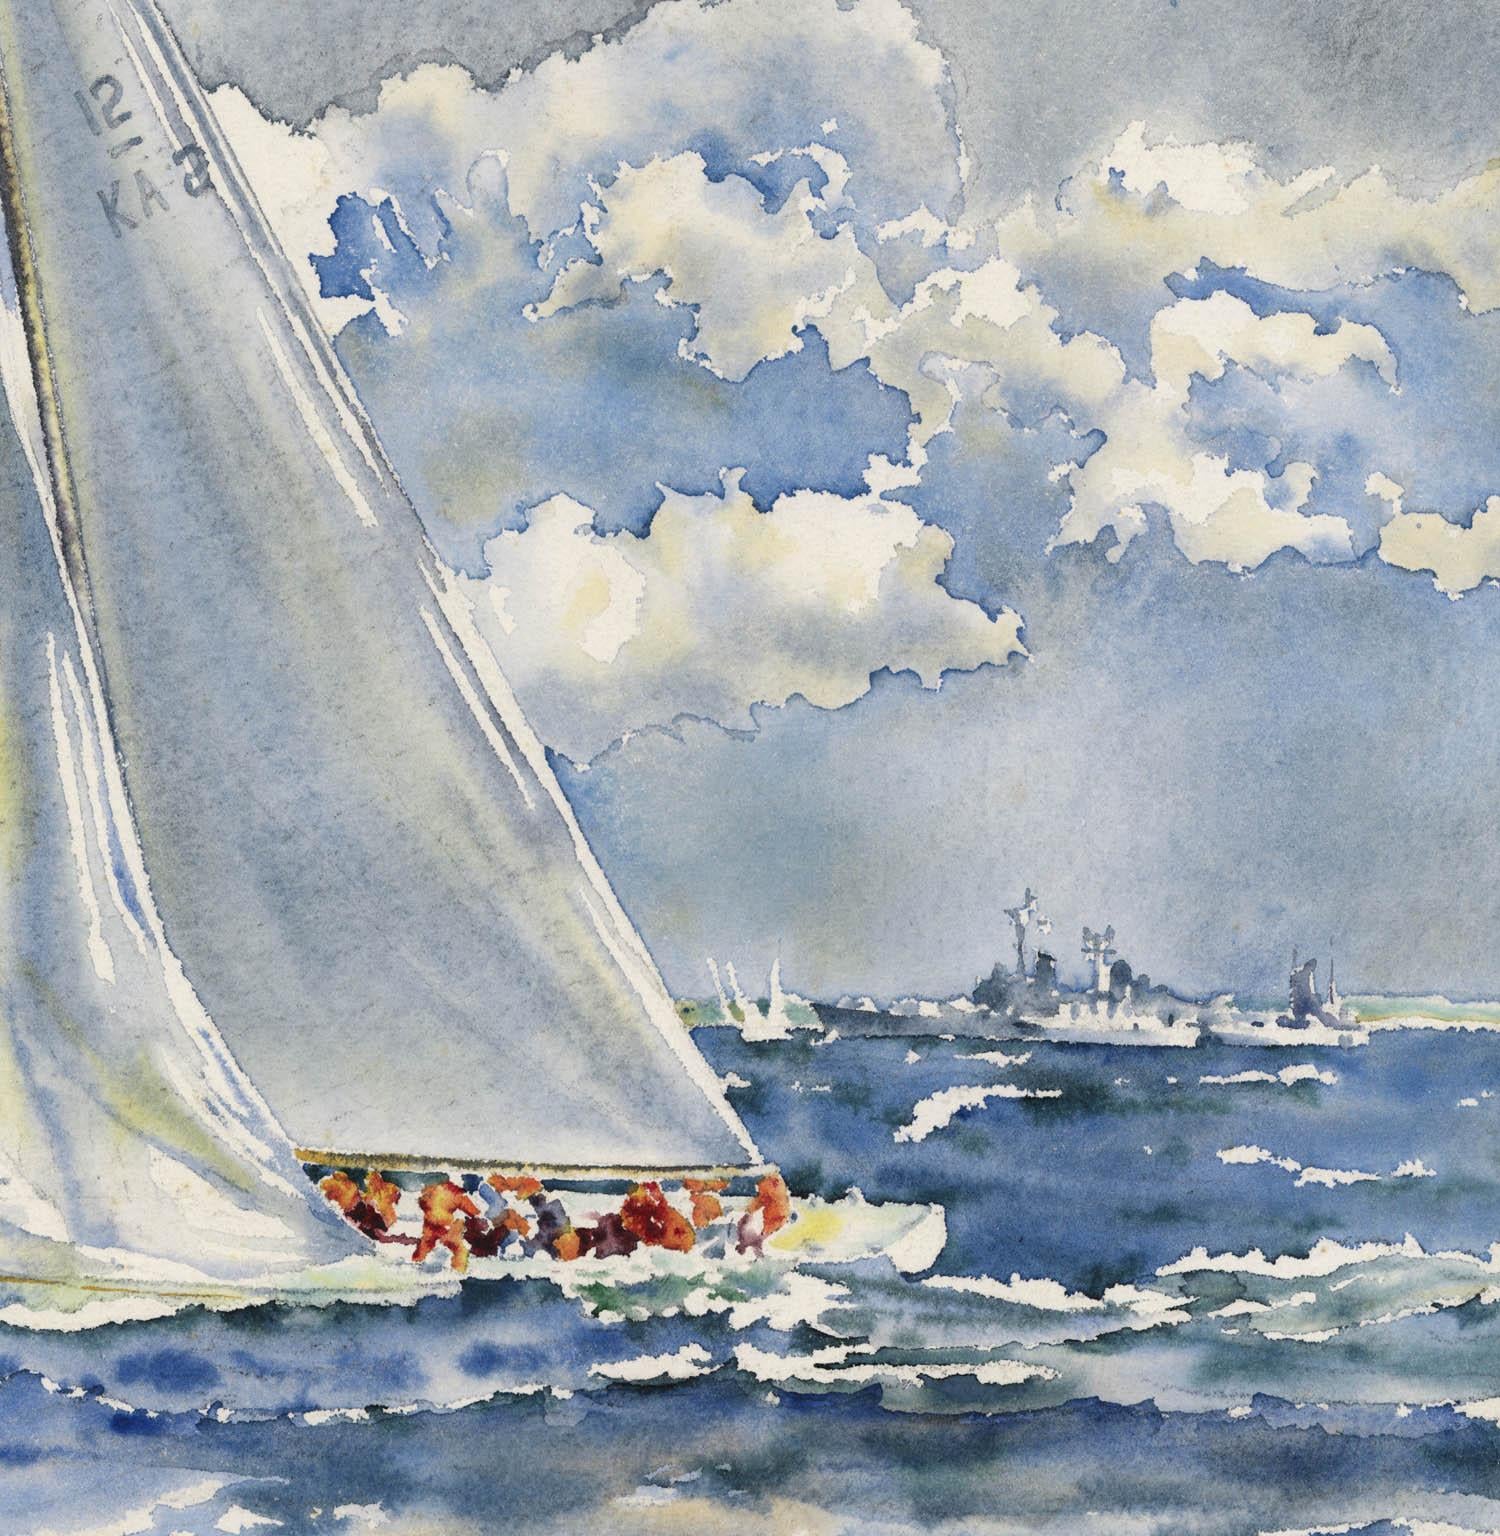 AMERICA'S CUP - 1967.  BEAT TO THE FINISH - INTREPID (USA) VS. DAME PATTIE (AUS).

“Beat to the Finish” is a 1967 watercolor by Joseph Webster Golinklin. Paper size 21 1/2 x 29 1/2